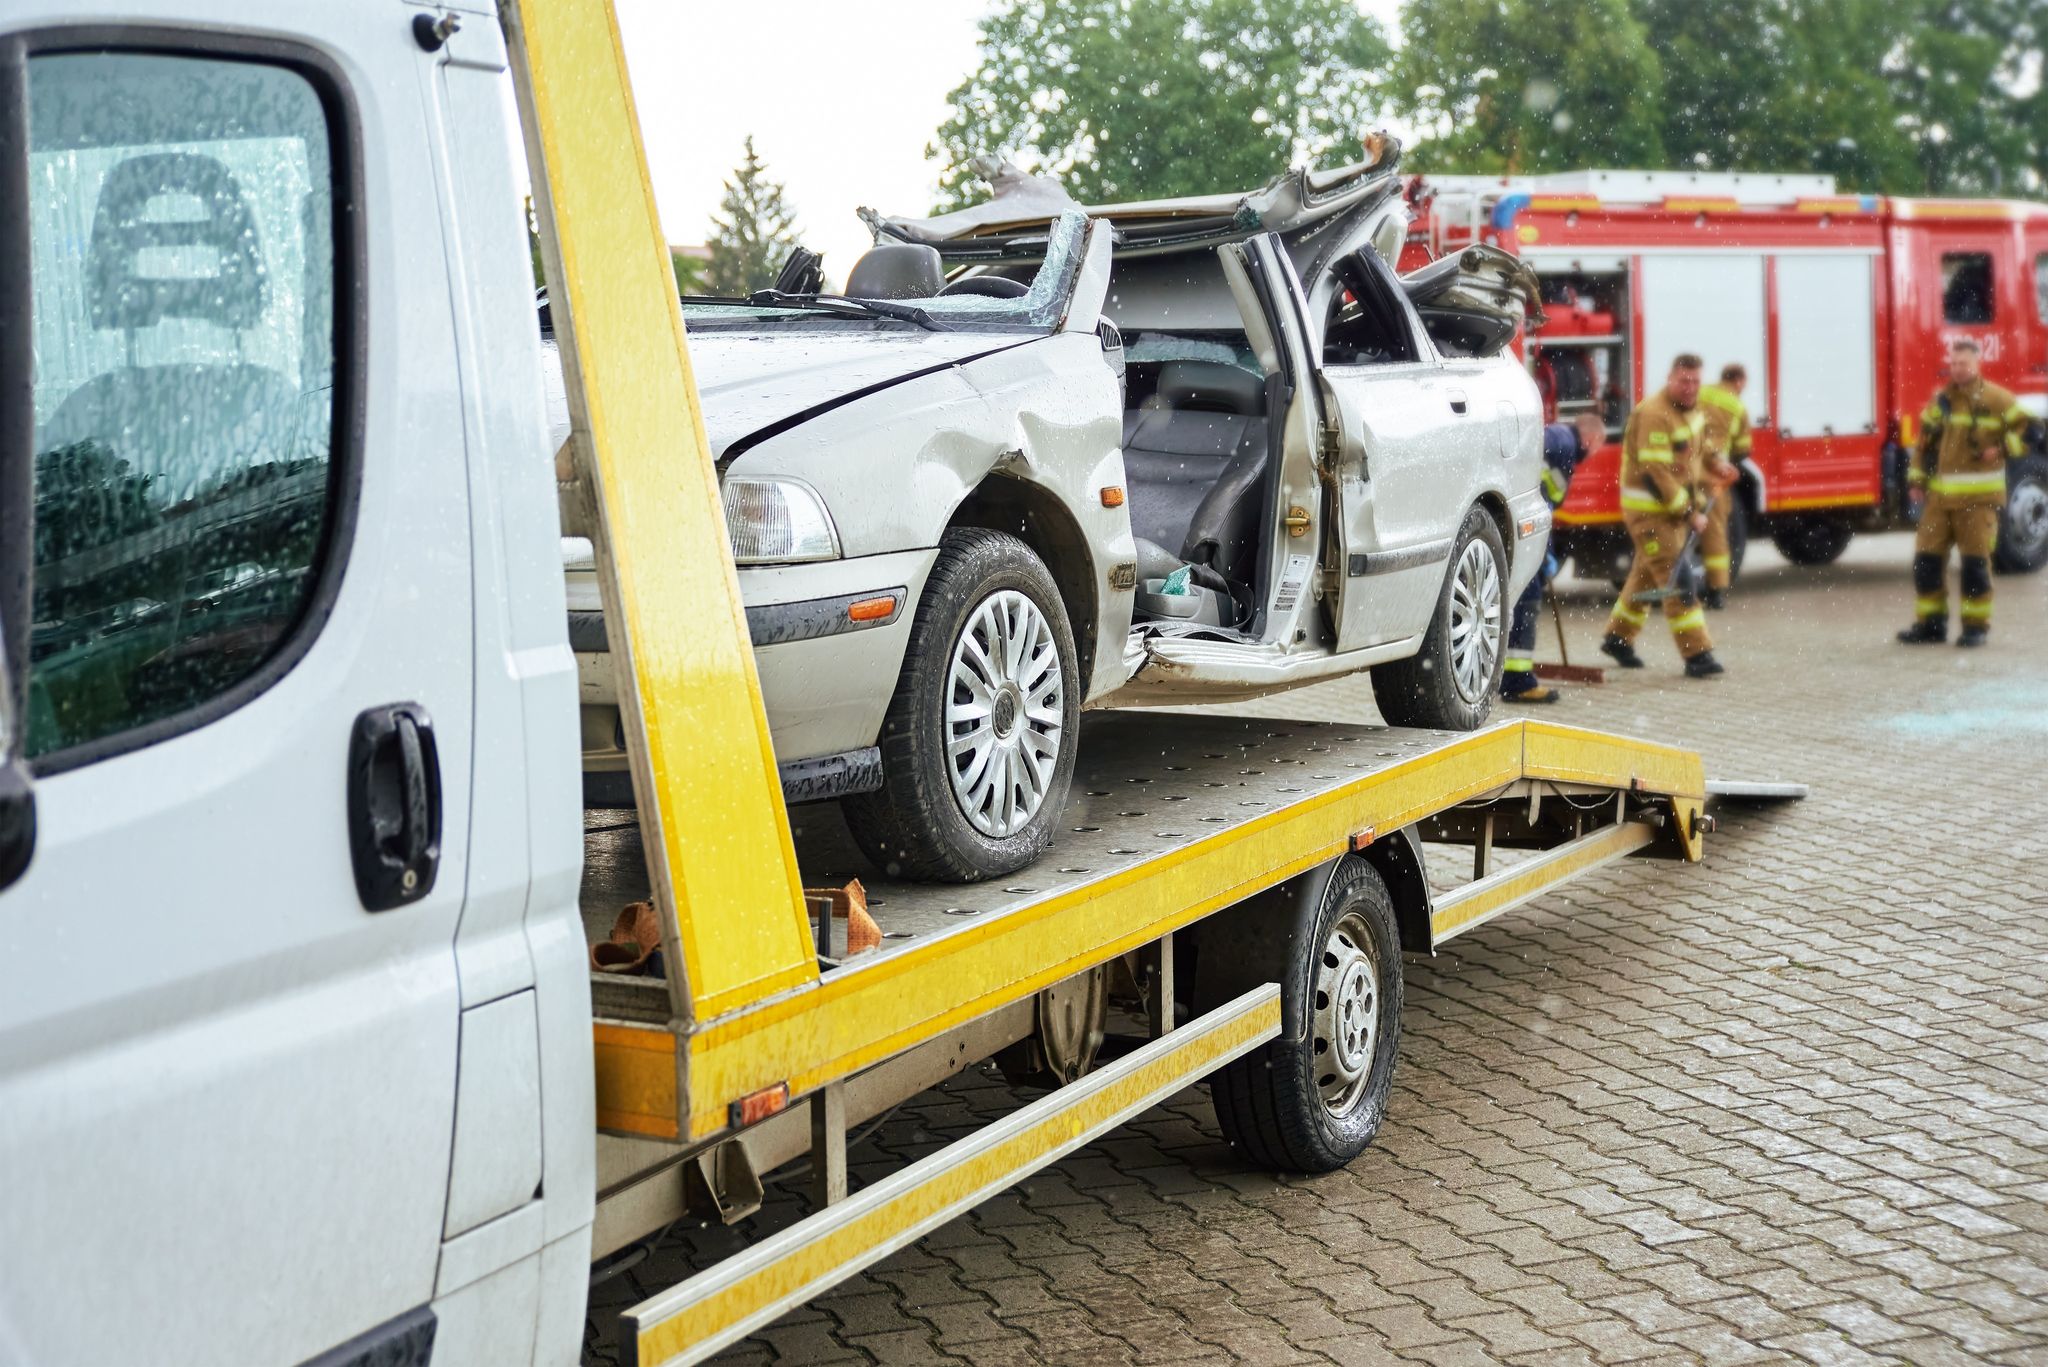 Wrecked car loading on tow truck after crash traffic accident